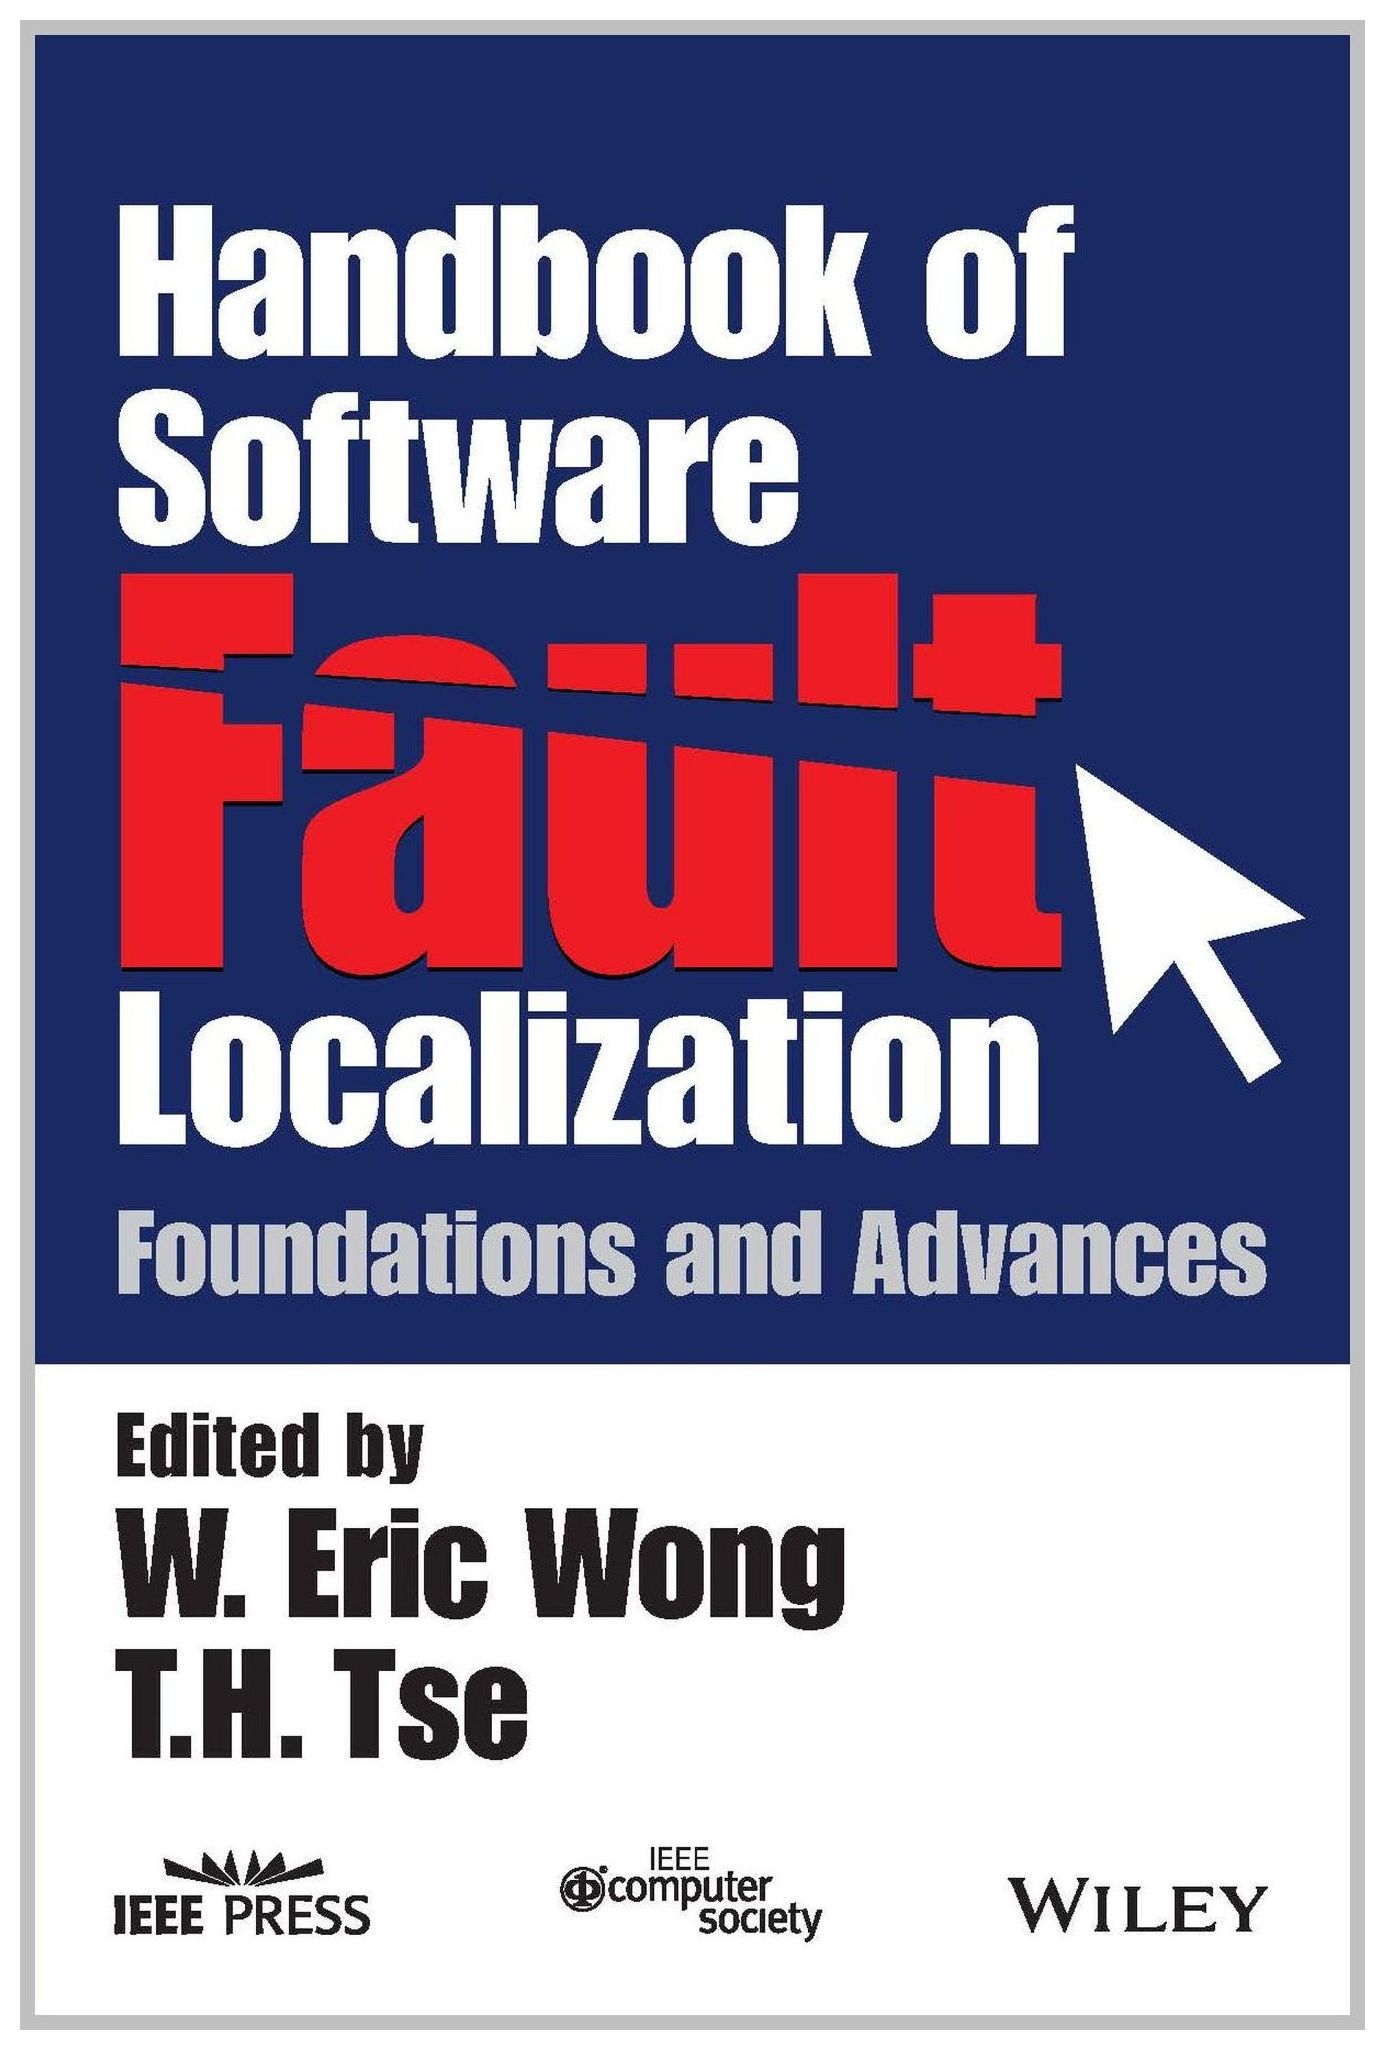 Click for more information on the cover of the Handbook of Software Fault Localization